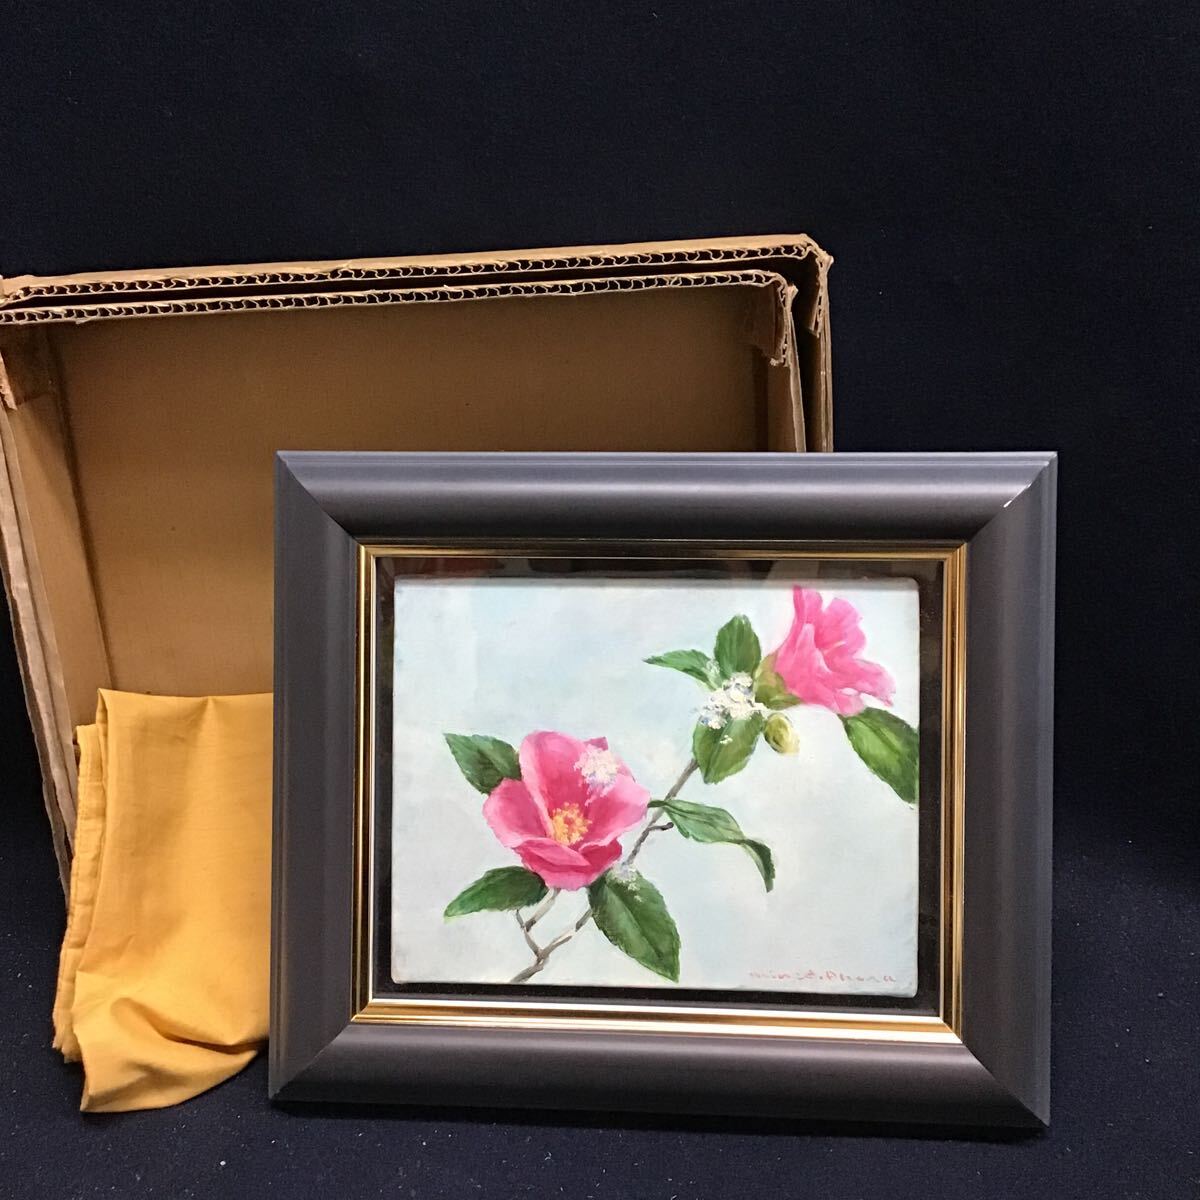 [Authentic] Nokoriyuki by Mineo Oura, canvas painting, oil painting, back sticker included, flower, still life, framed, 1999, Nokoriyuki, Painting, Oil painting, Nature, Landscape painting